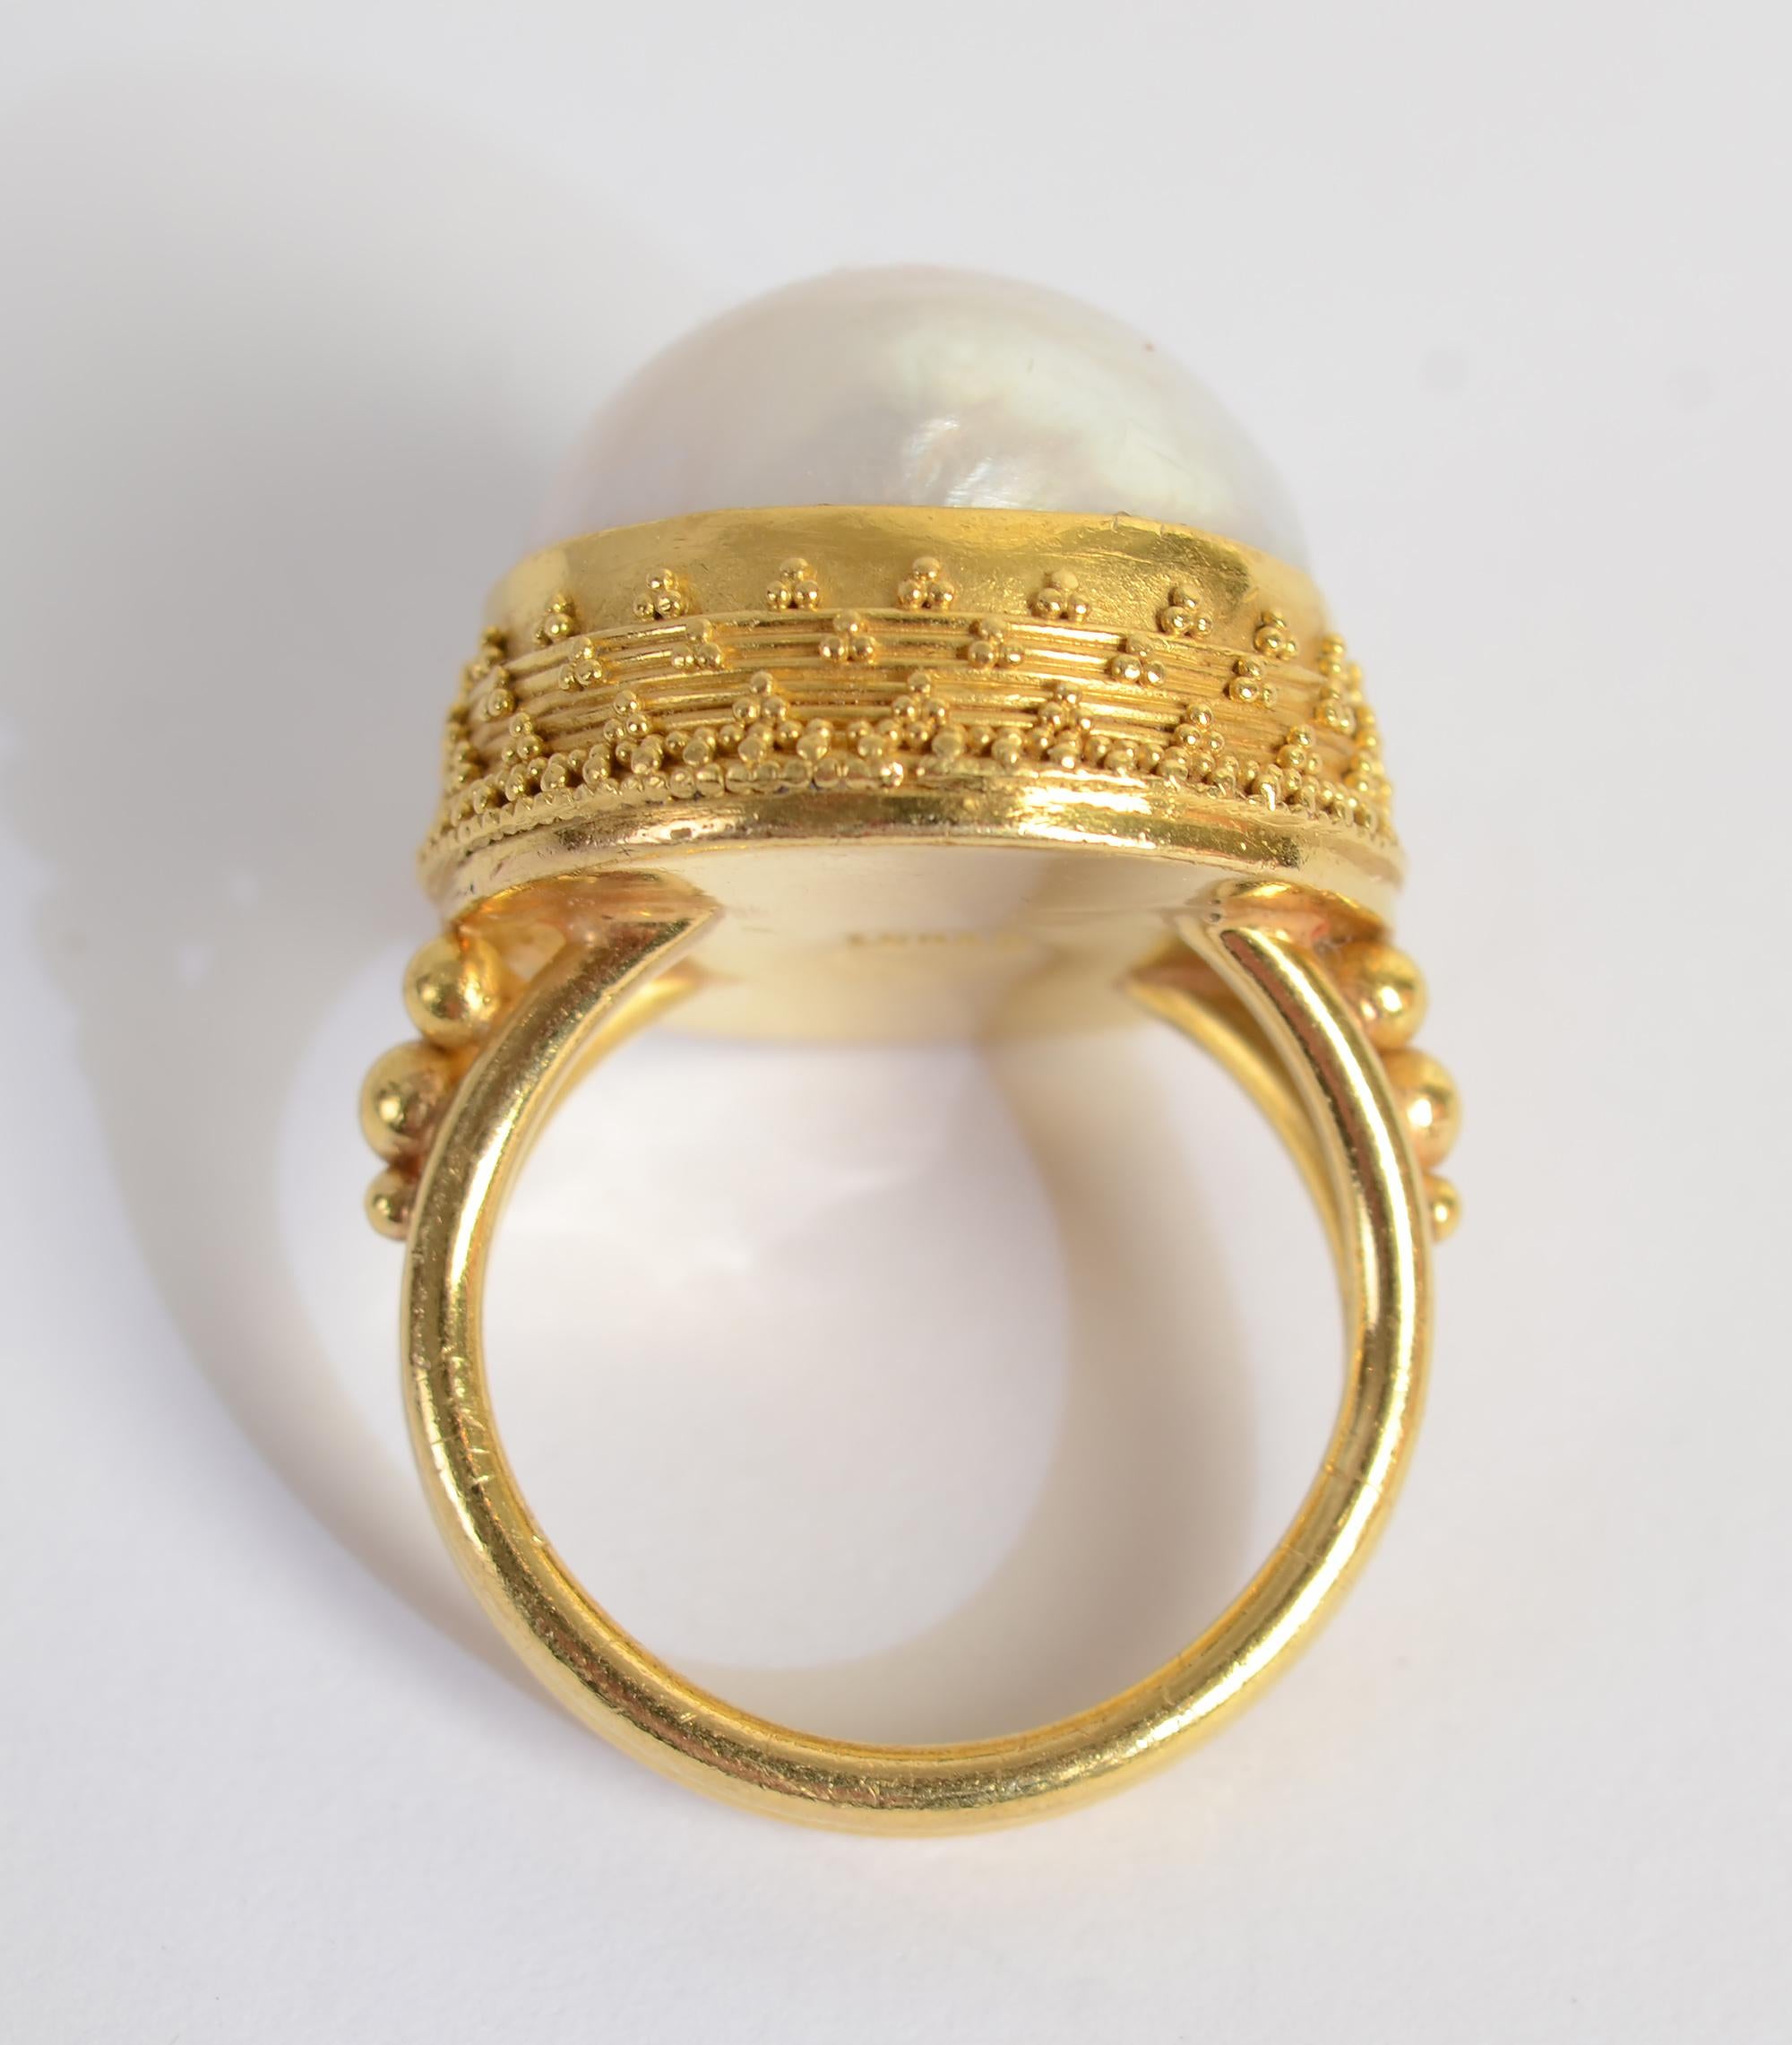 Imposing gold ring by Luna Felix featuring a 17 mm round South Sea pearl. The stone is surrounded by a multi-tier bezel with banding and extraordinarily fine granulation.
Much of Felix's work utilizes Etruscan granulation. She has been designing